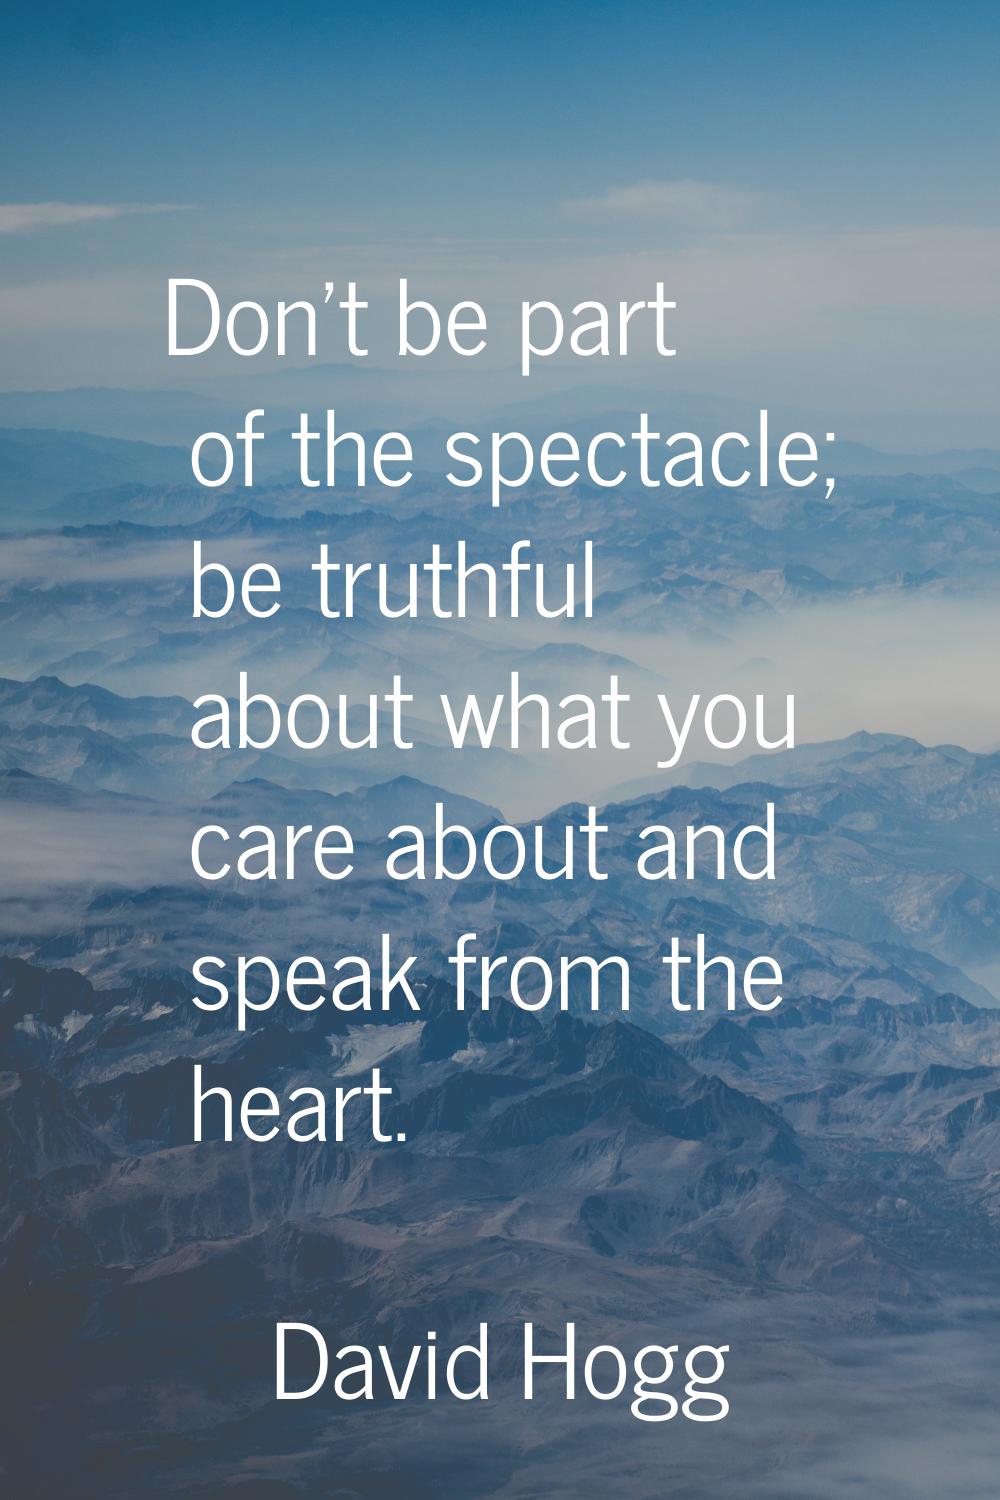 Don't be part of the spectacle; be truthful about what you care about and speak from the heart.